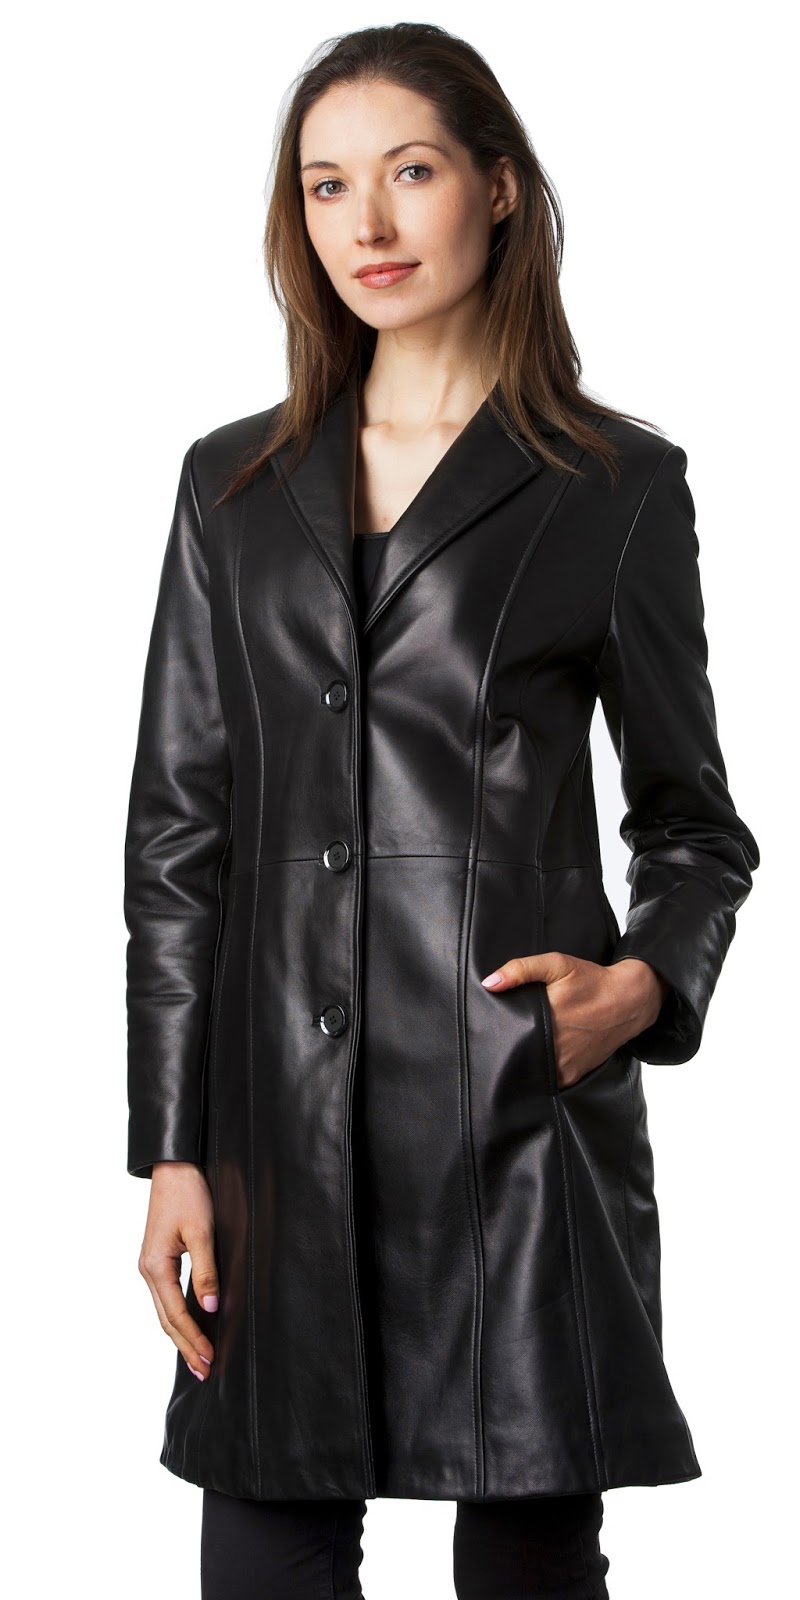 Leather Coat Daydreams Overstock Leather Coats